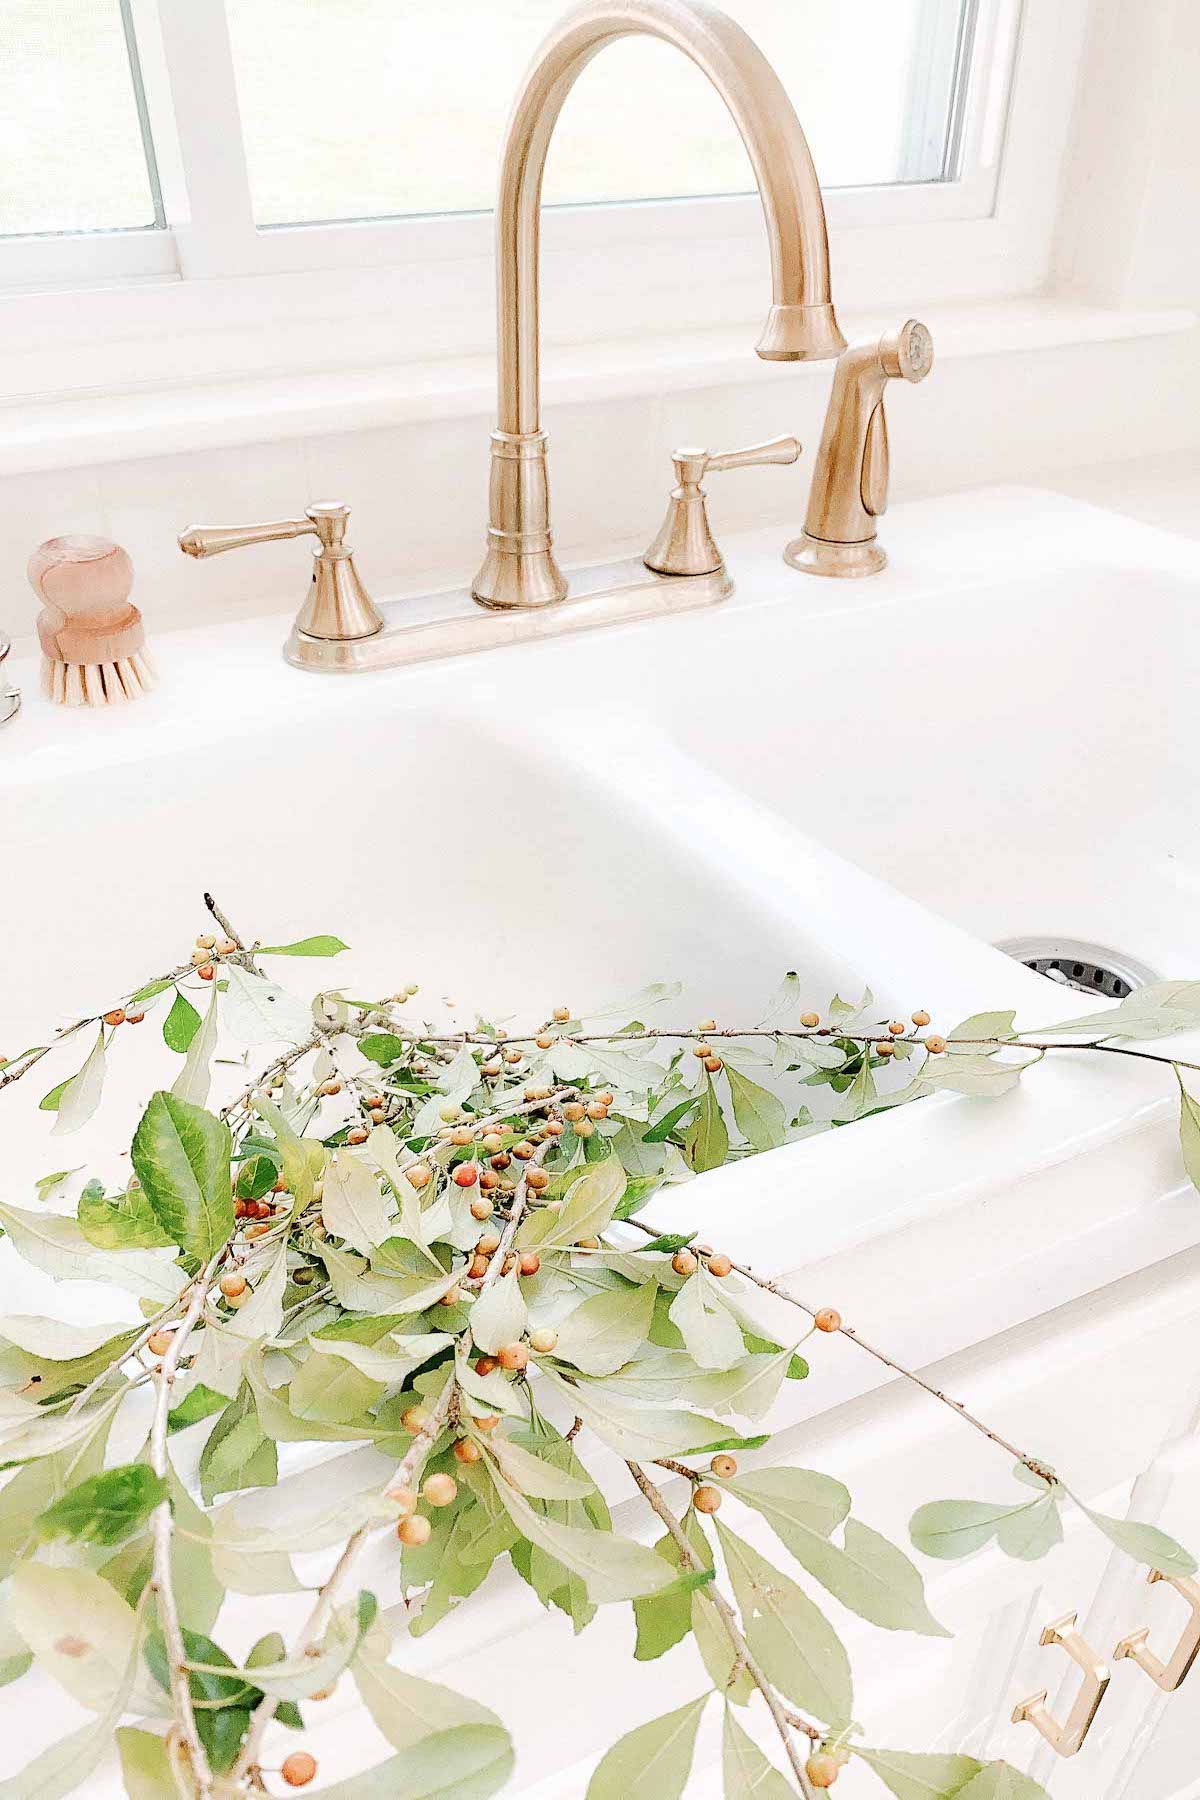 A minimalist kitchen sink with fall branches for minimalist fall decor